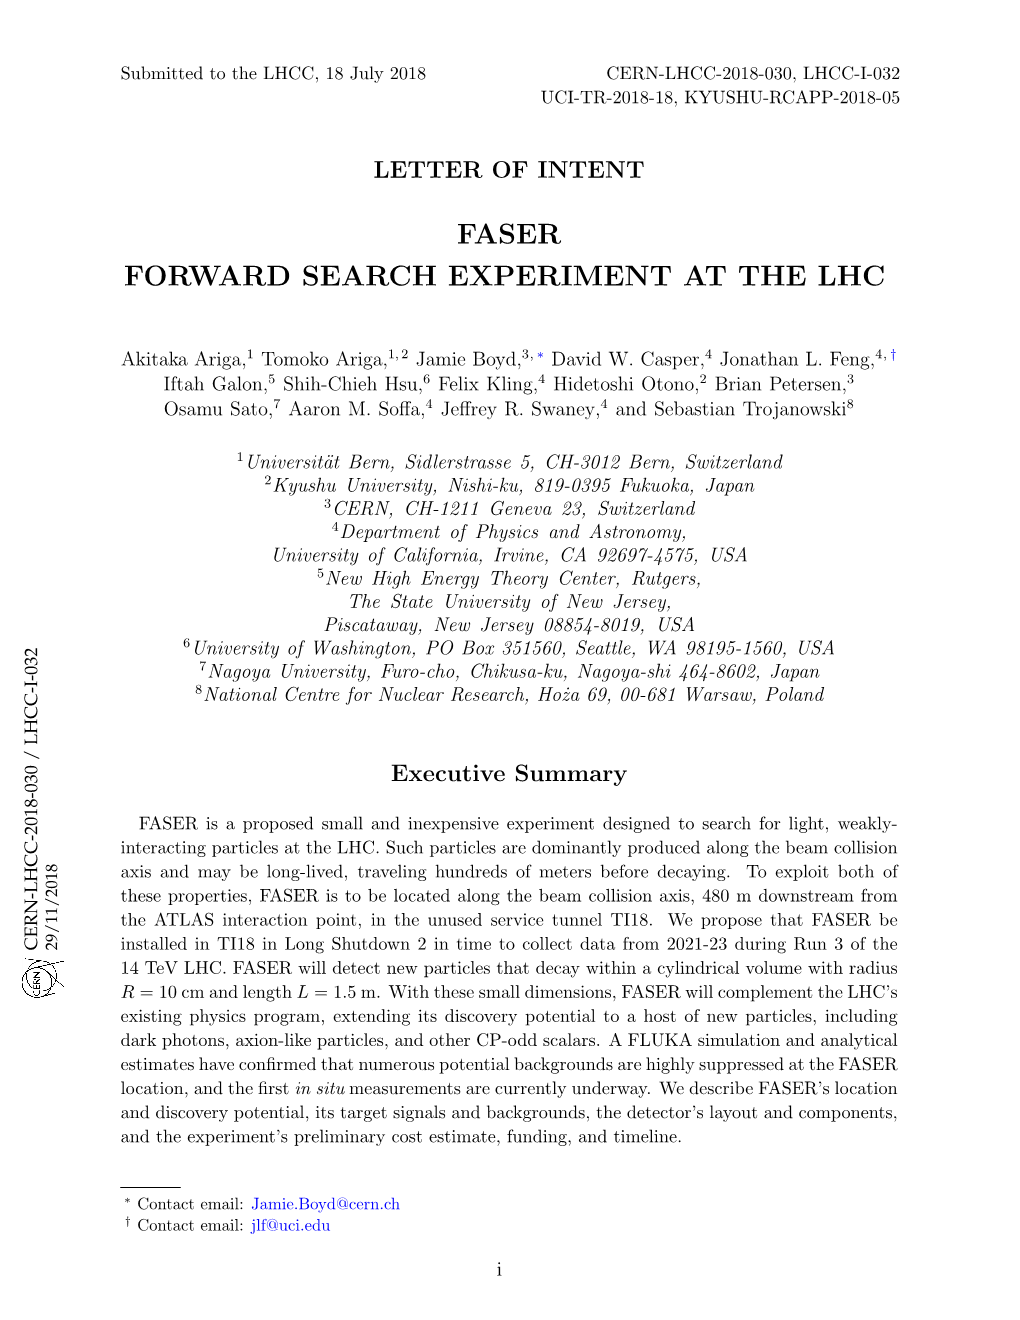 Faser Forward Search Experiment at The